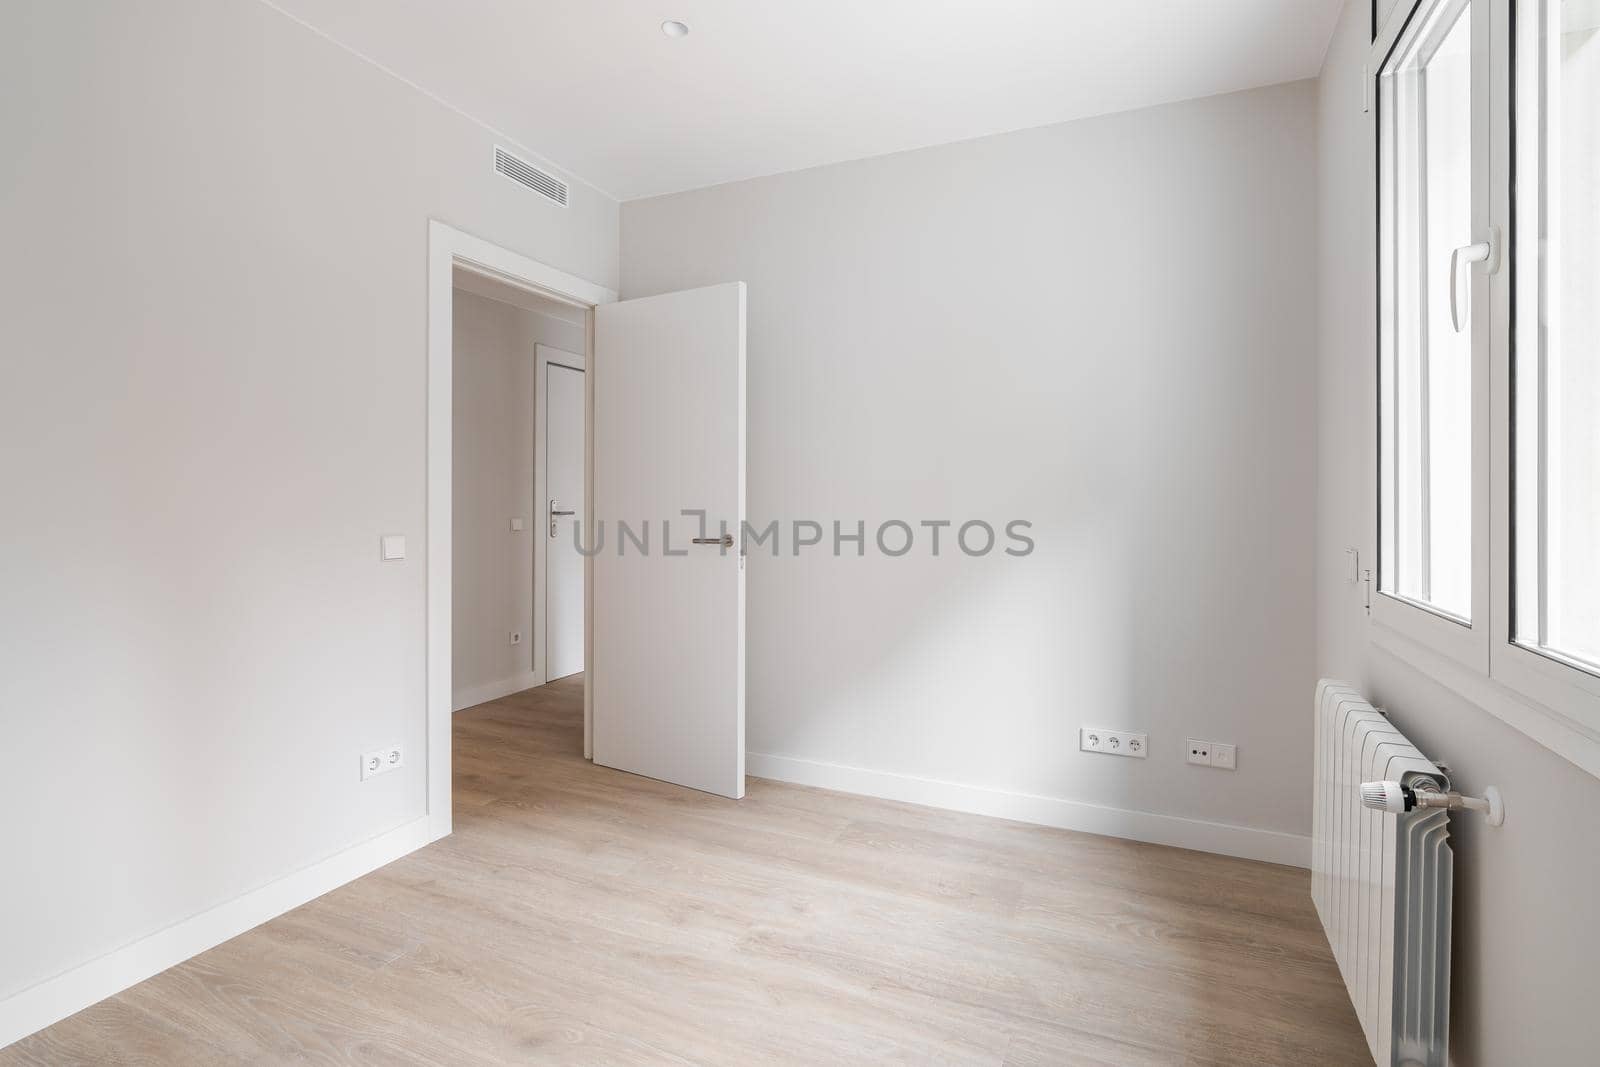 Empty room with door, window, and heating radiator in a white interior house by apavlin